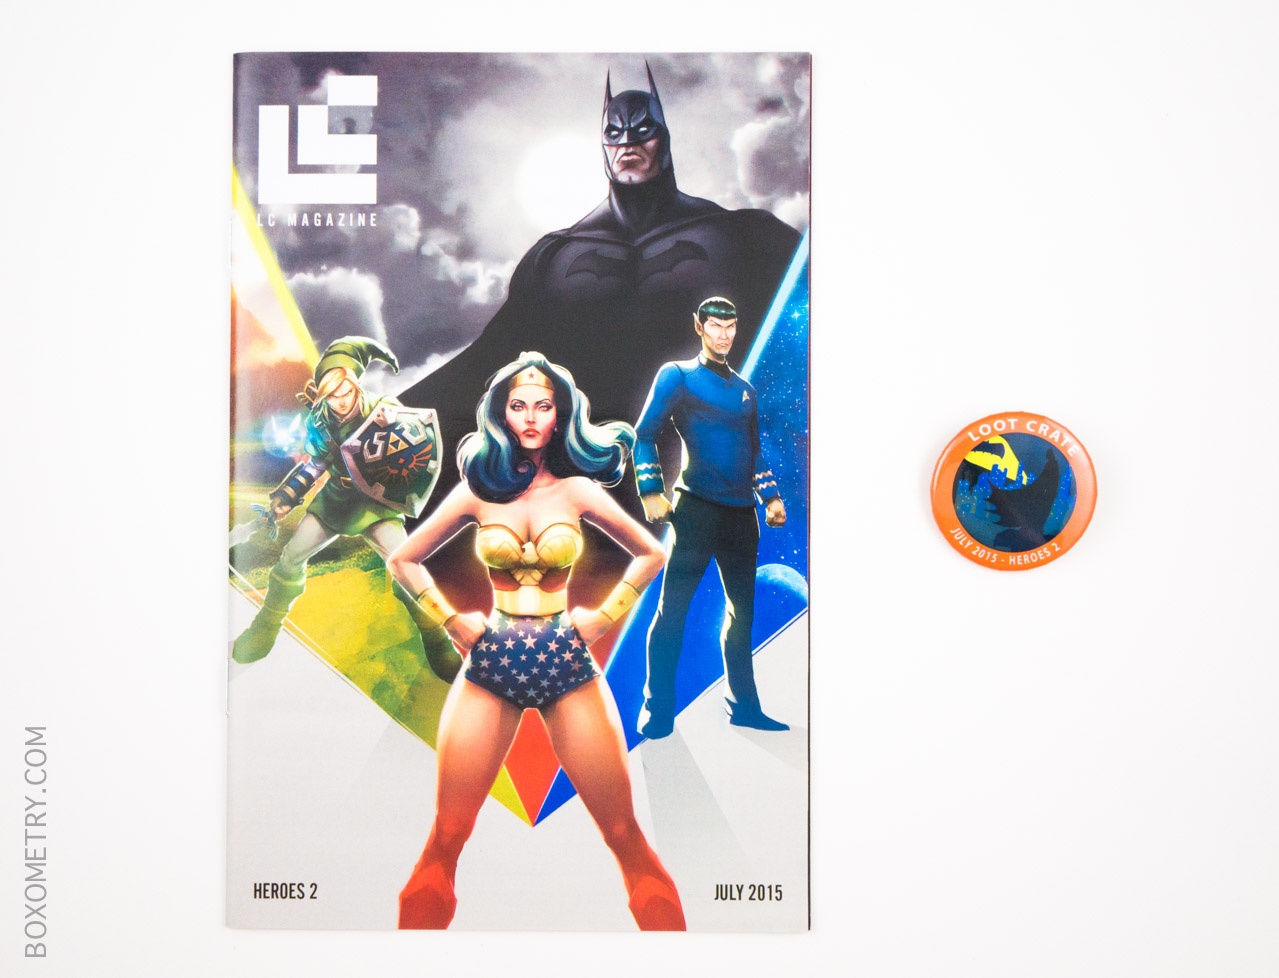 Boxometry Loot Crate July 2015 Review - Mini Magazine and Heroes 2 Pin